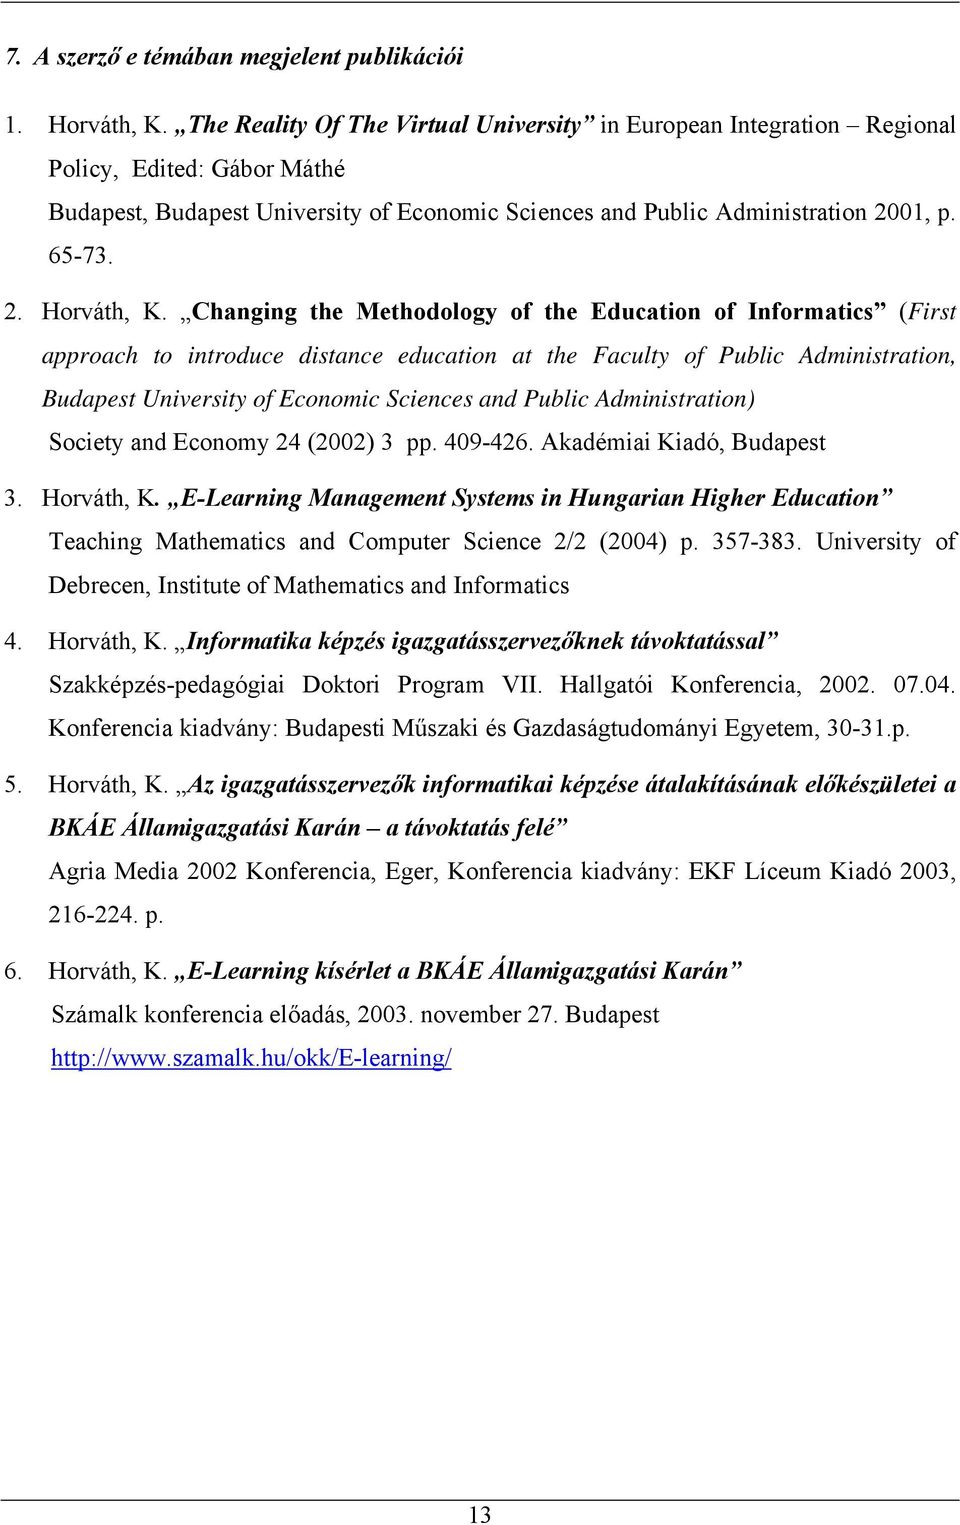 Changing the Methodology of the Education of Informatics (First approach to introduce distance education at the Faculty of Public Administration, Budapest University of Economic Sciences and Public